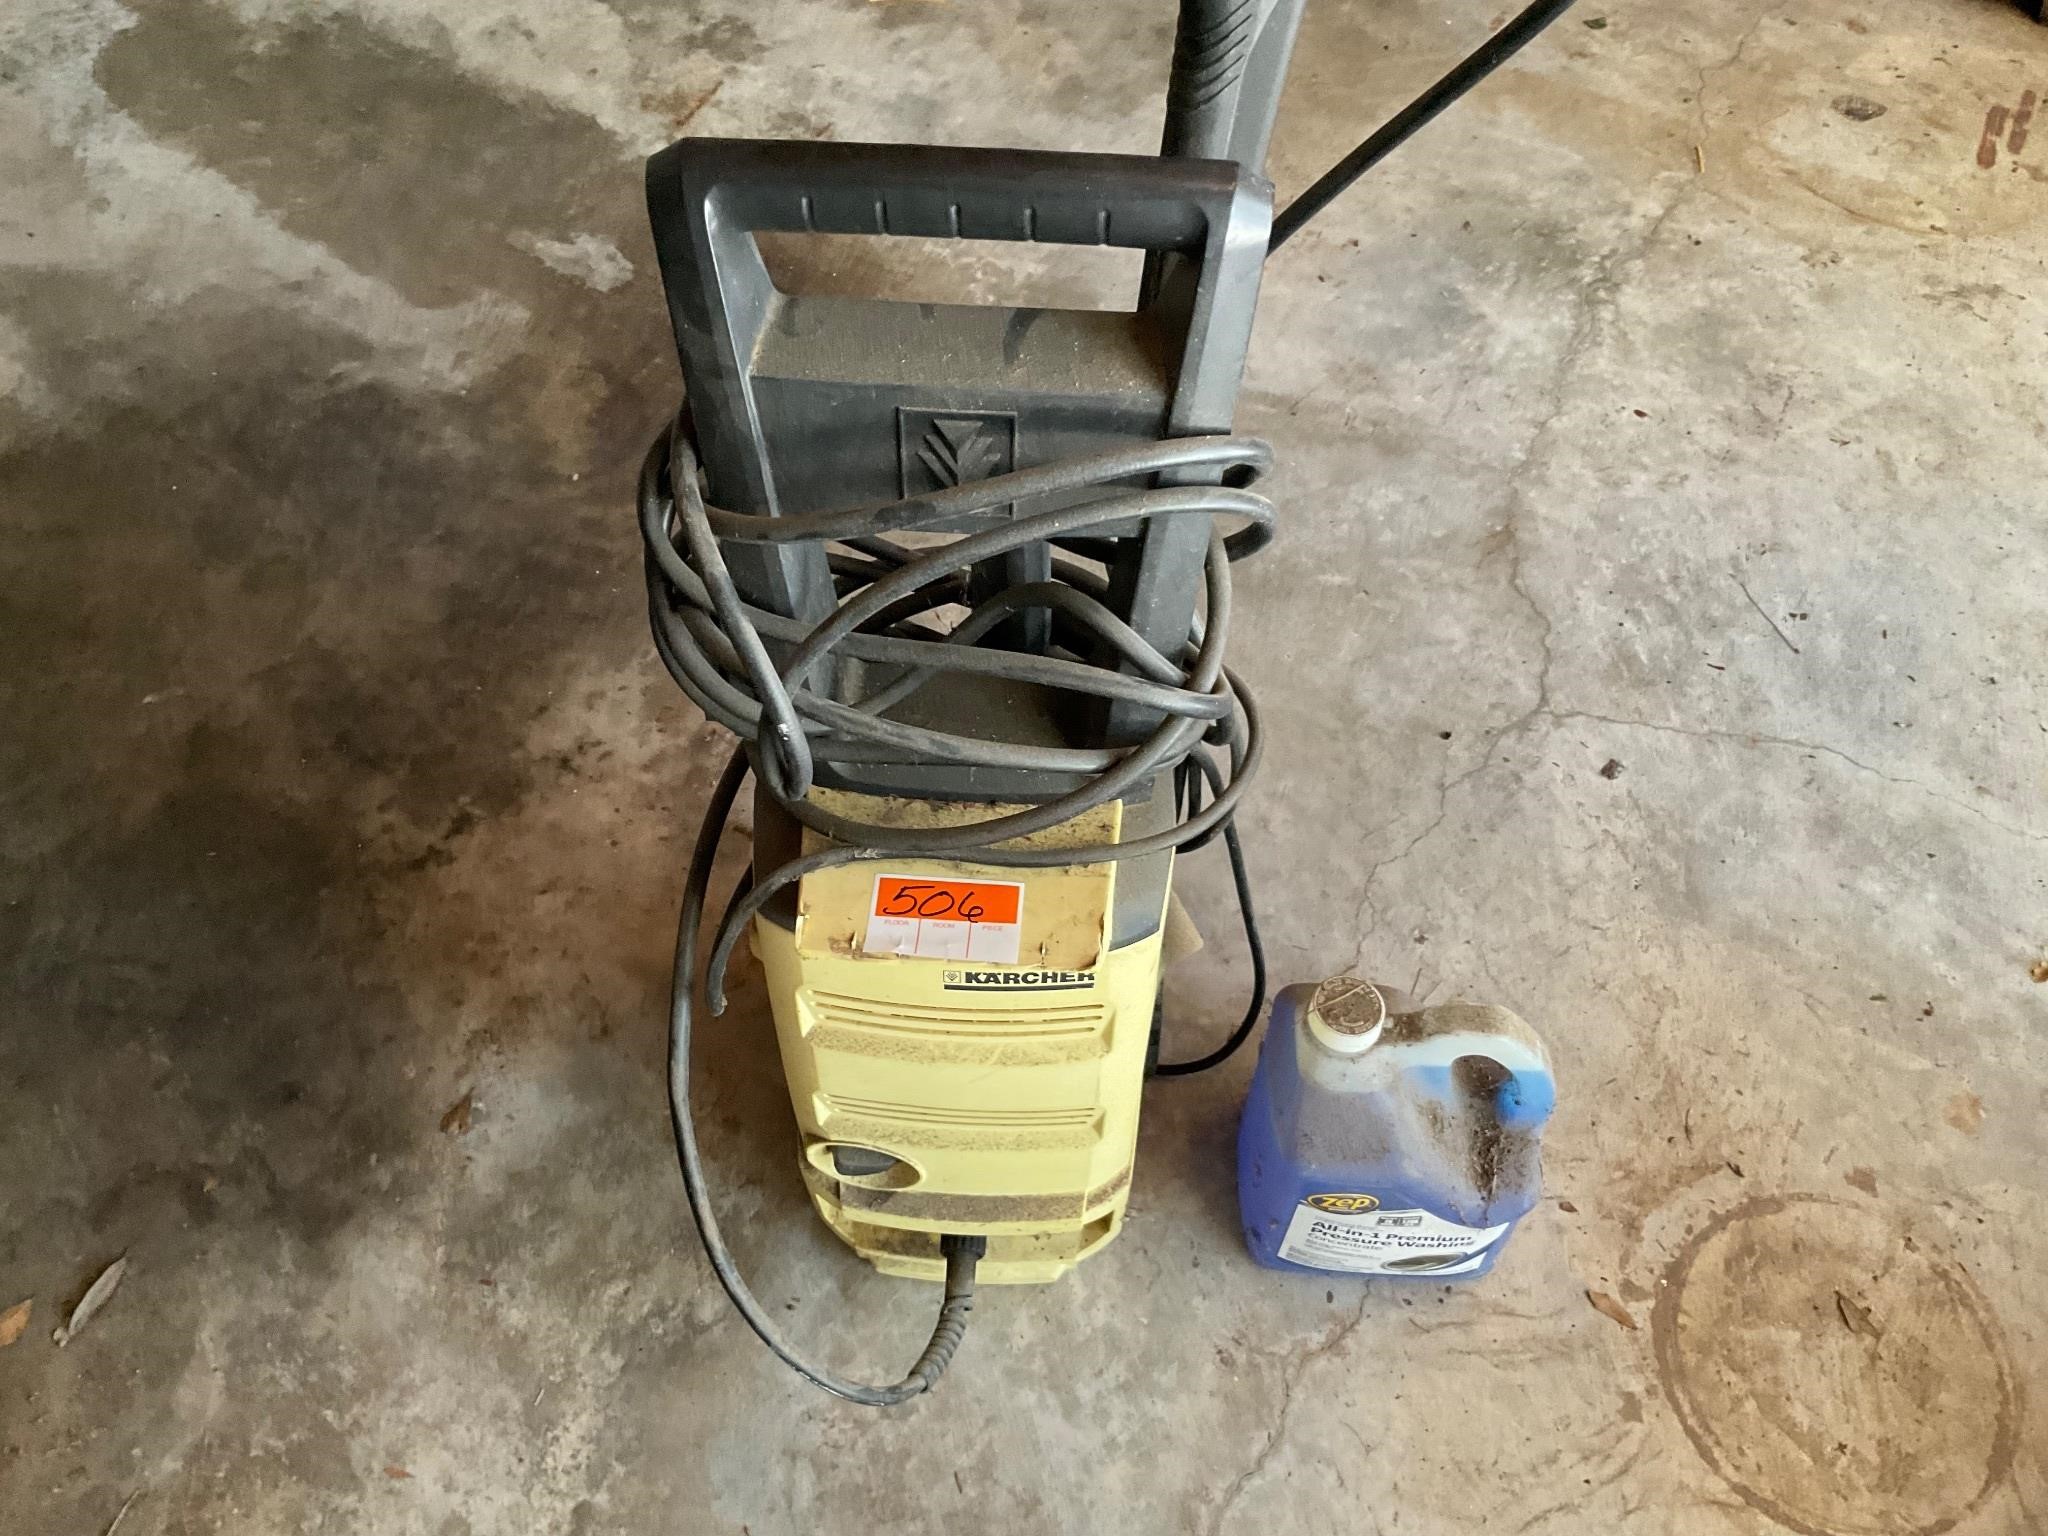 ELECTRIC PRESSURE WASHER and cleaner